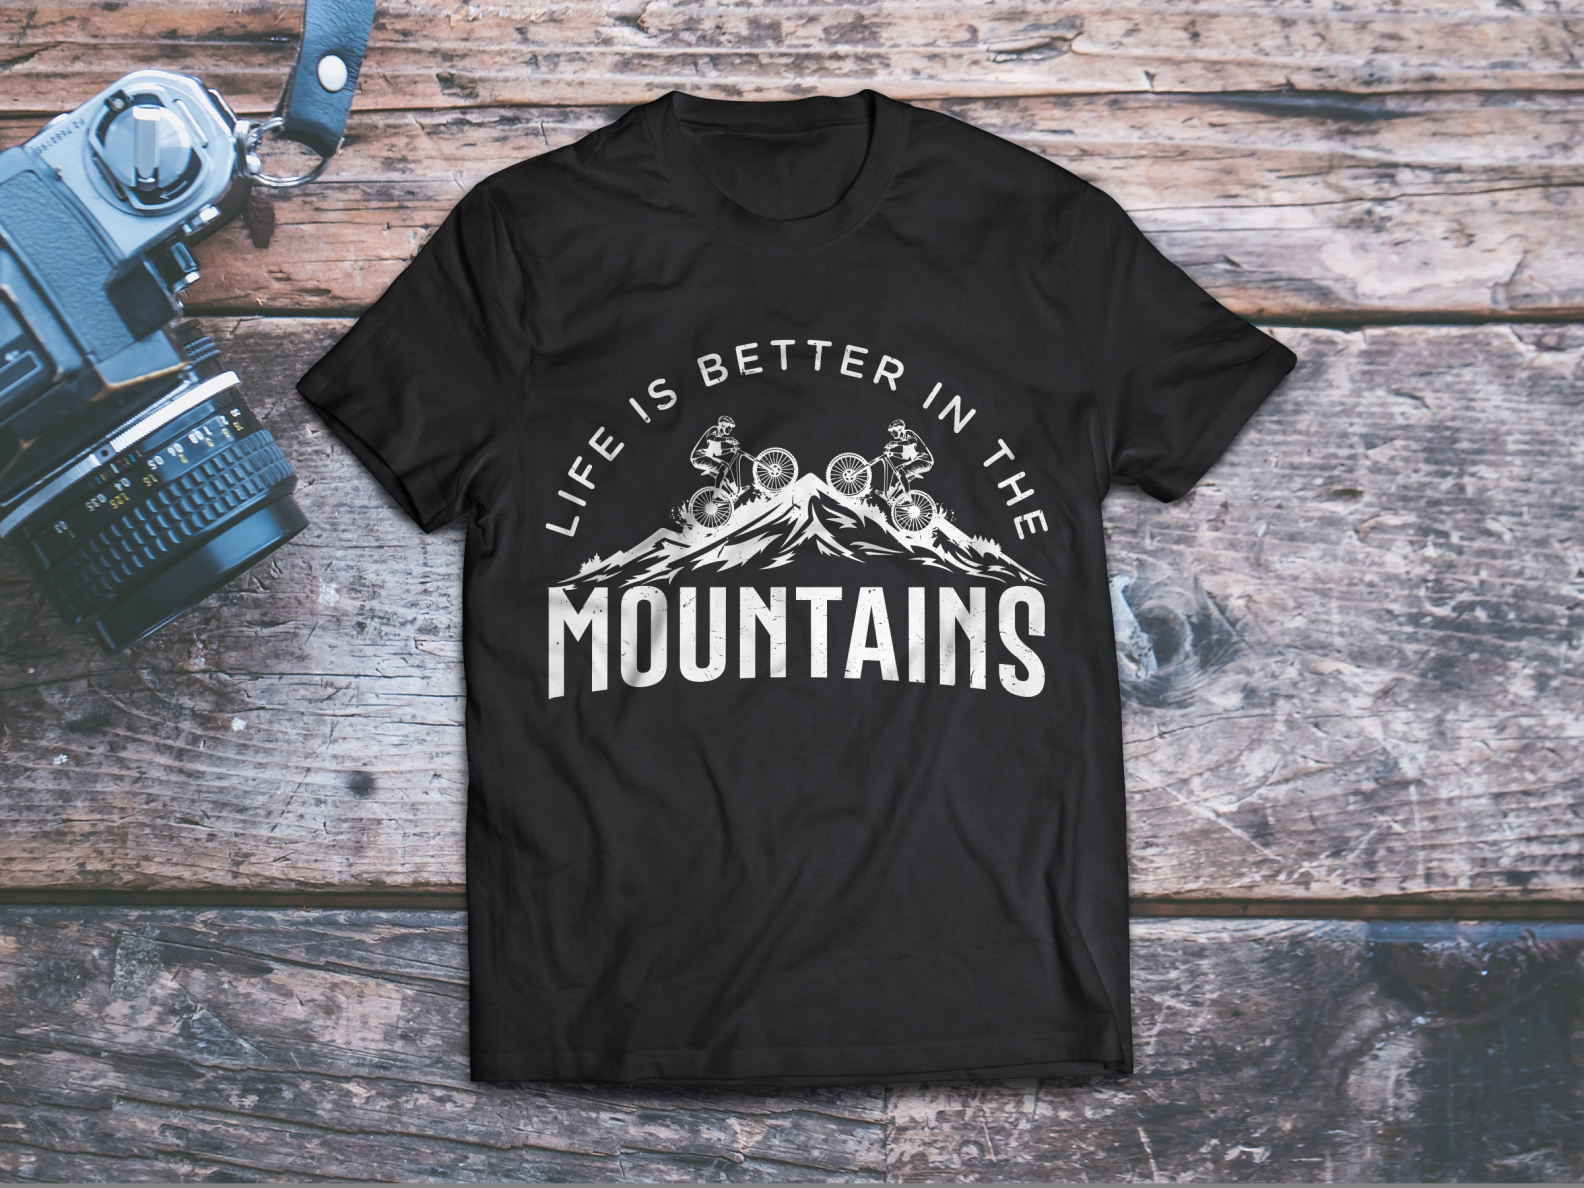 MOUNTAINS T SHIRT DESIGN by MD. SHAWON on Dribbble